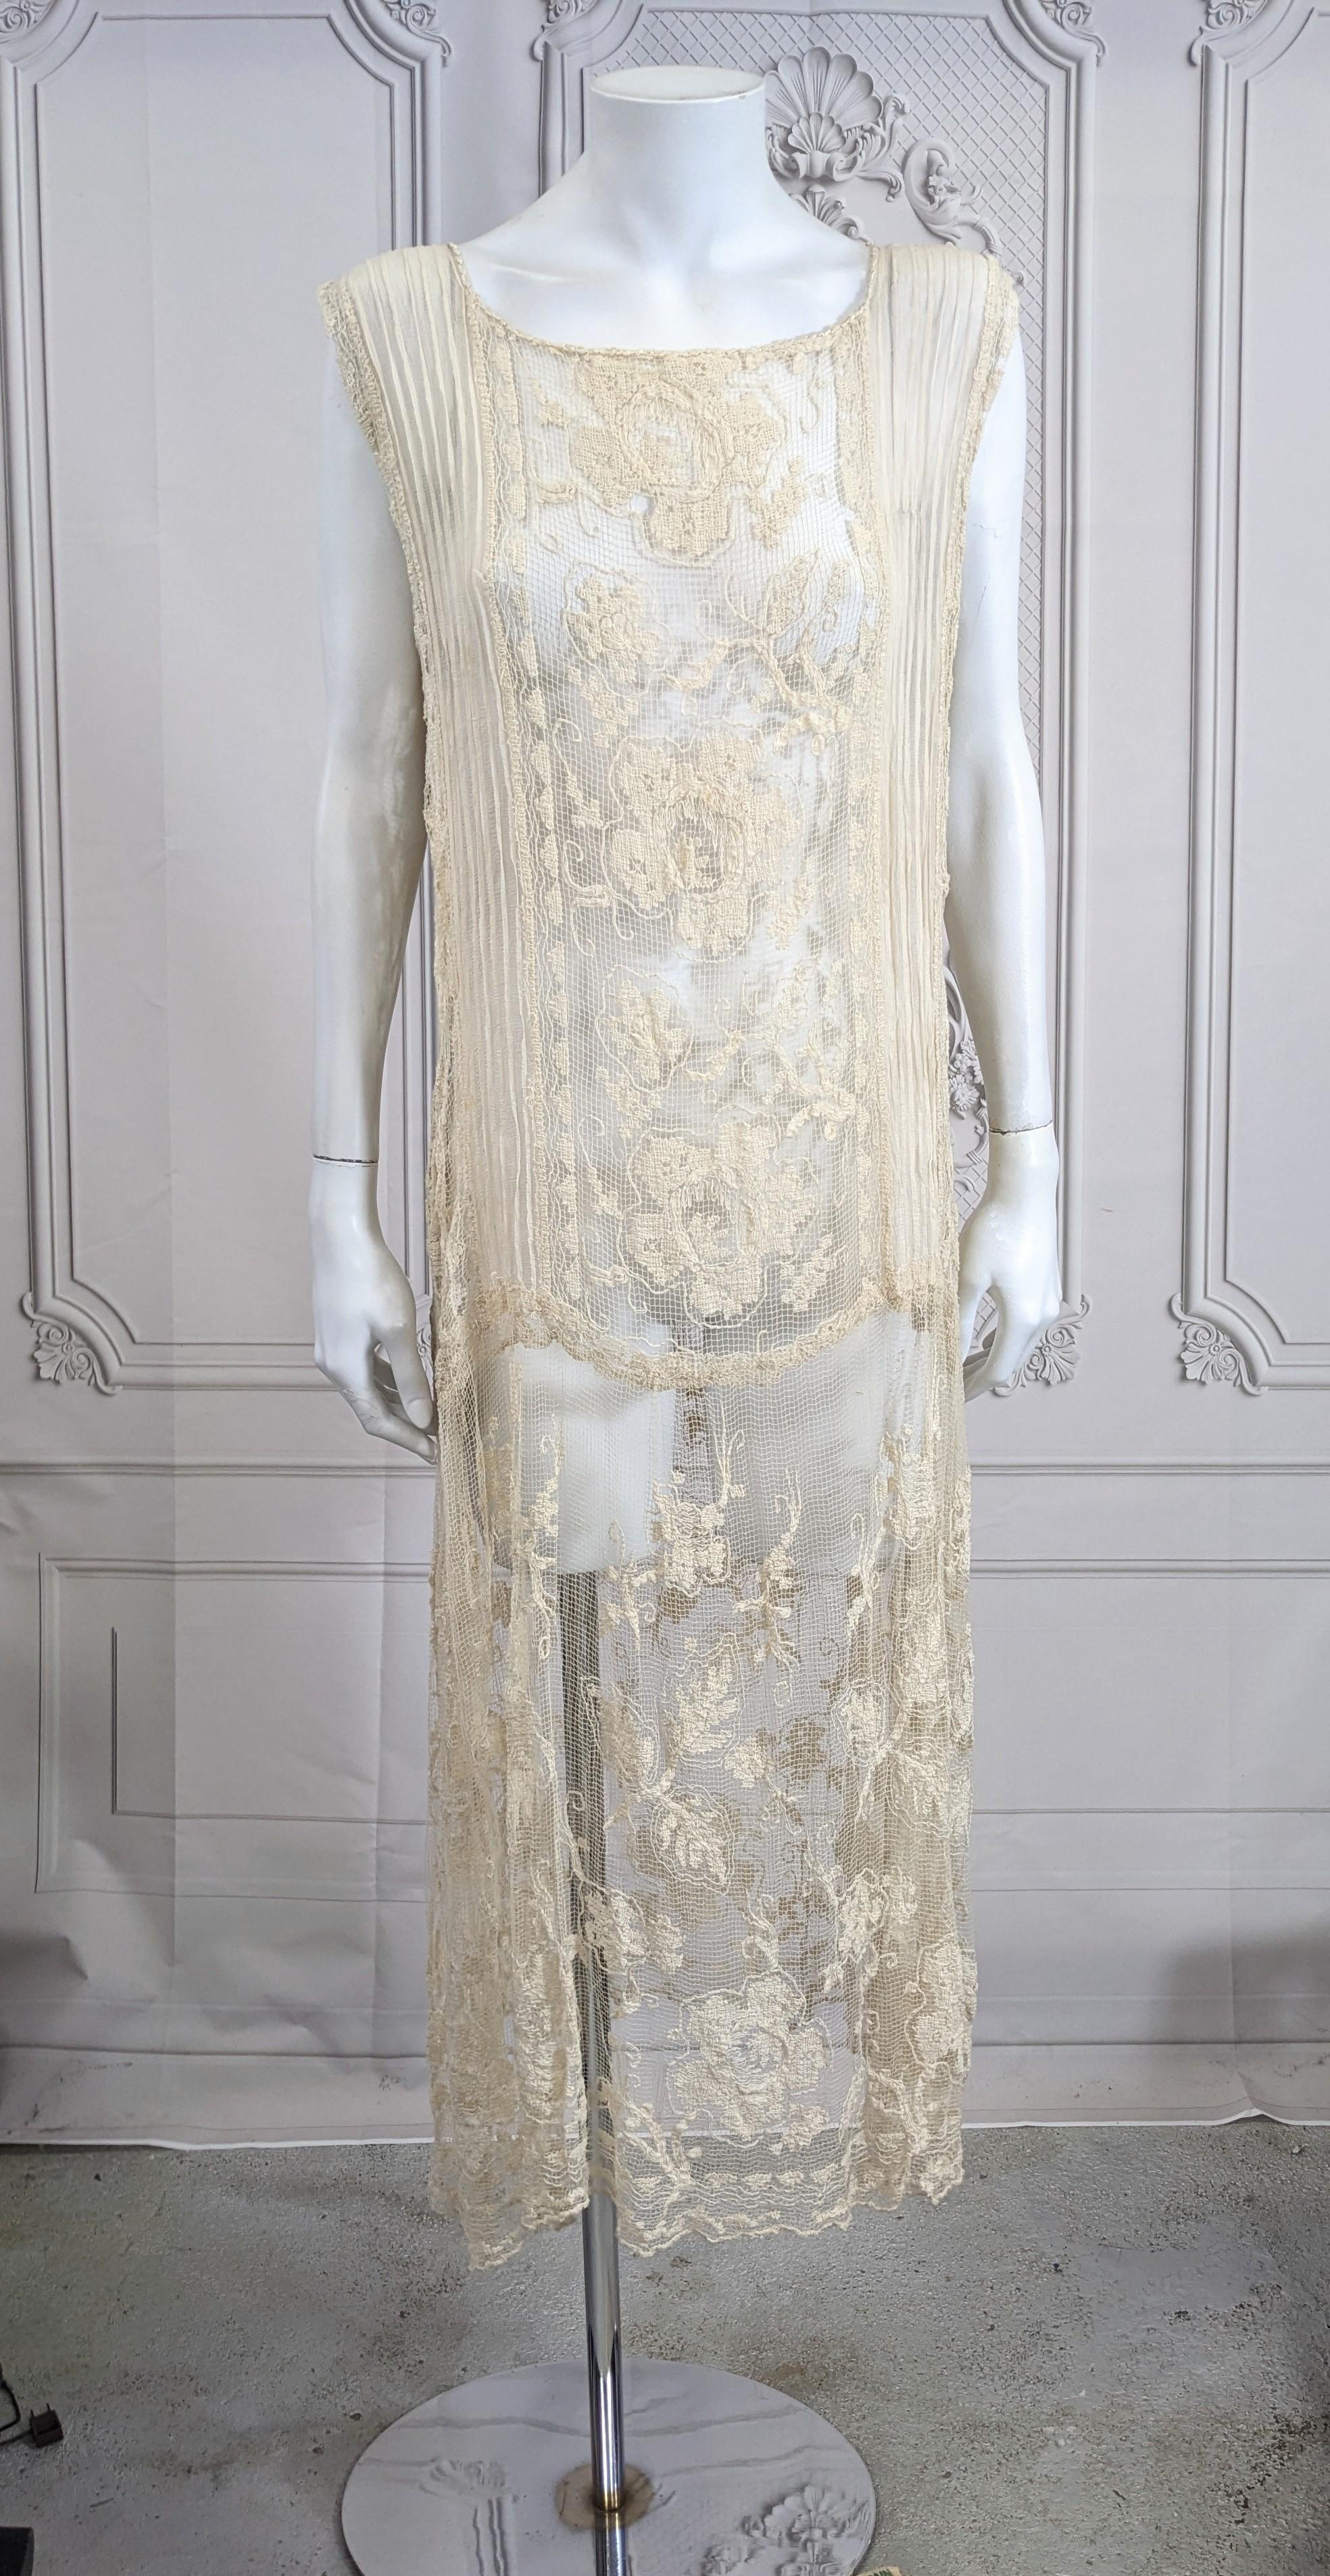 Charming Cotton Filet Lace and Chiffon Dress from the 1920's. Pin tucked silk chiffon is inserted with cotton filet lace panels and attached to a lace skirt gathered from hip. Silk knot trim embroidered neckline. Slip over style. Sheer needs slip.